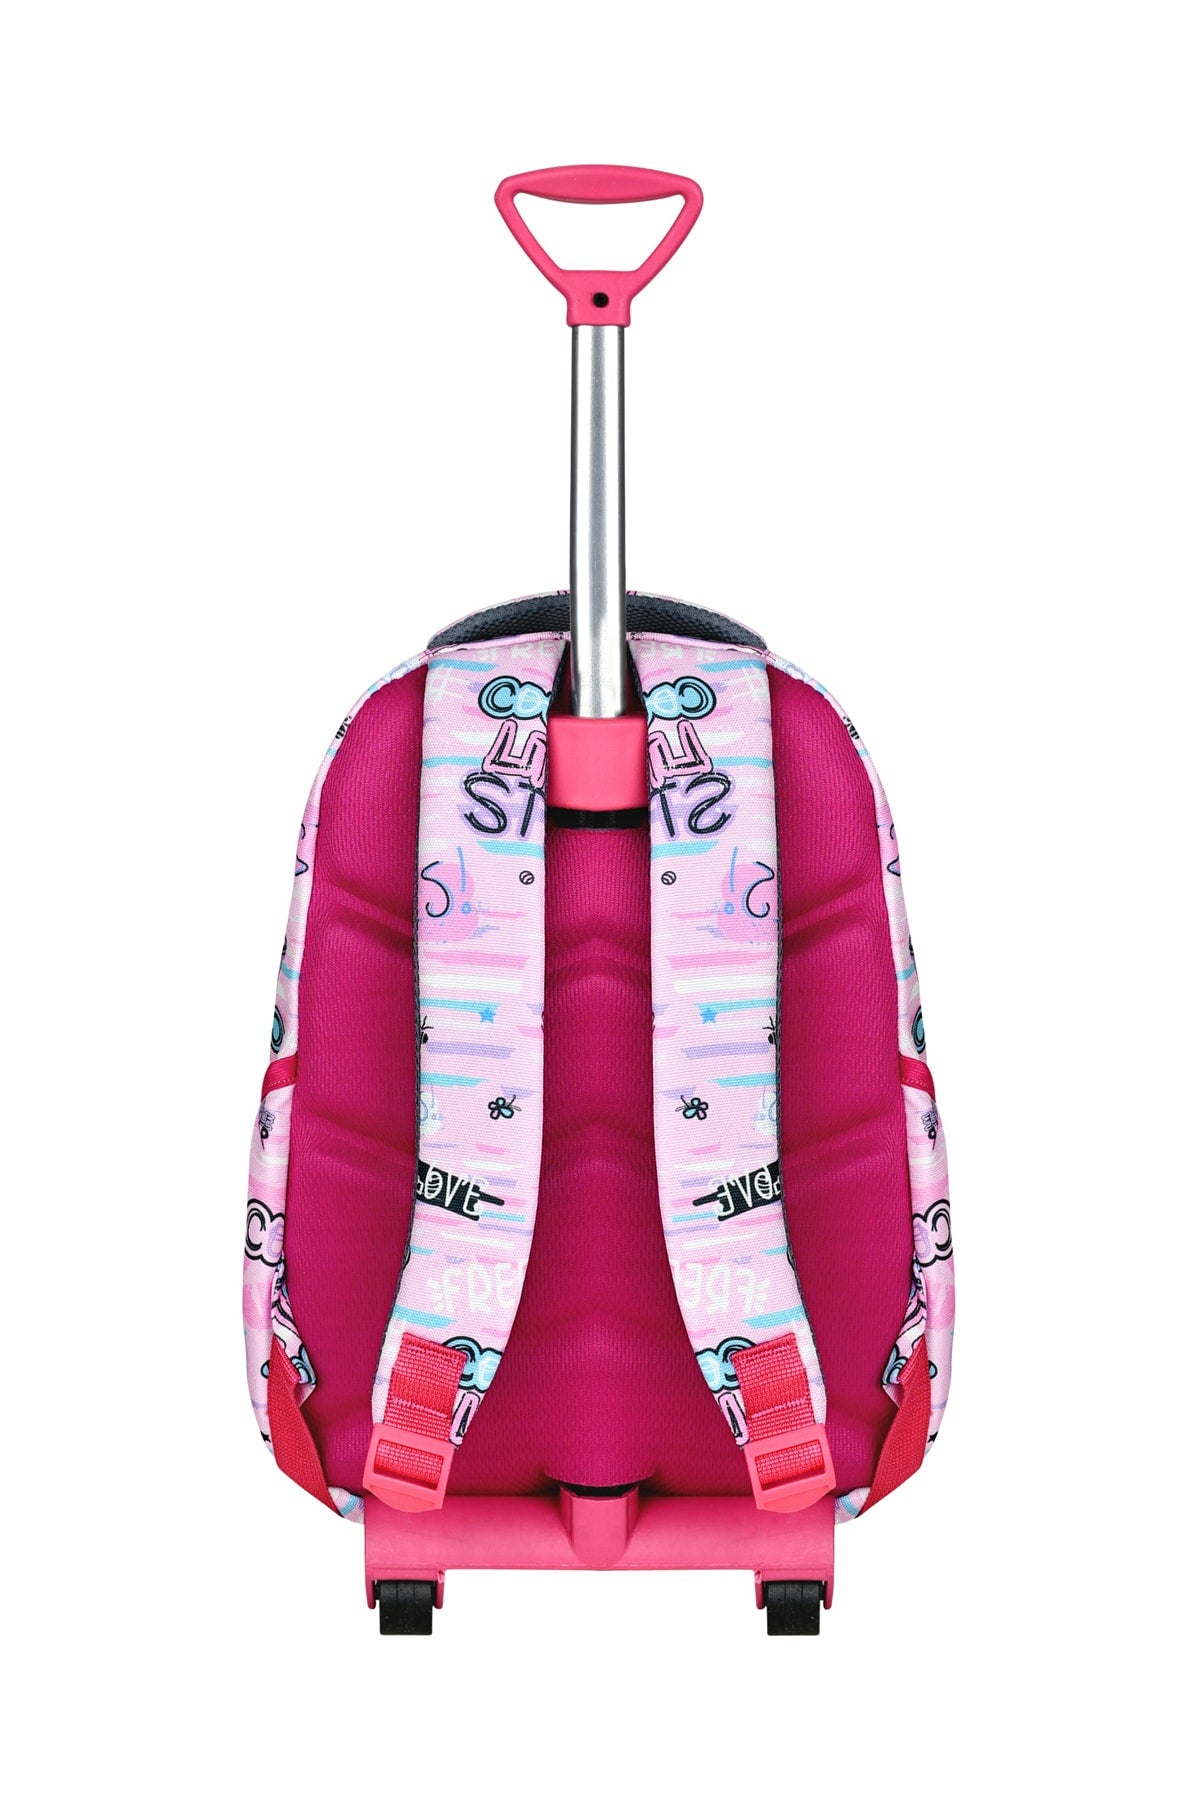 3 Pcs School Set with Squeegee, Pink Car Pattern Primary School Bag + Lunch Box + Pencil Holder